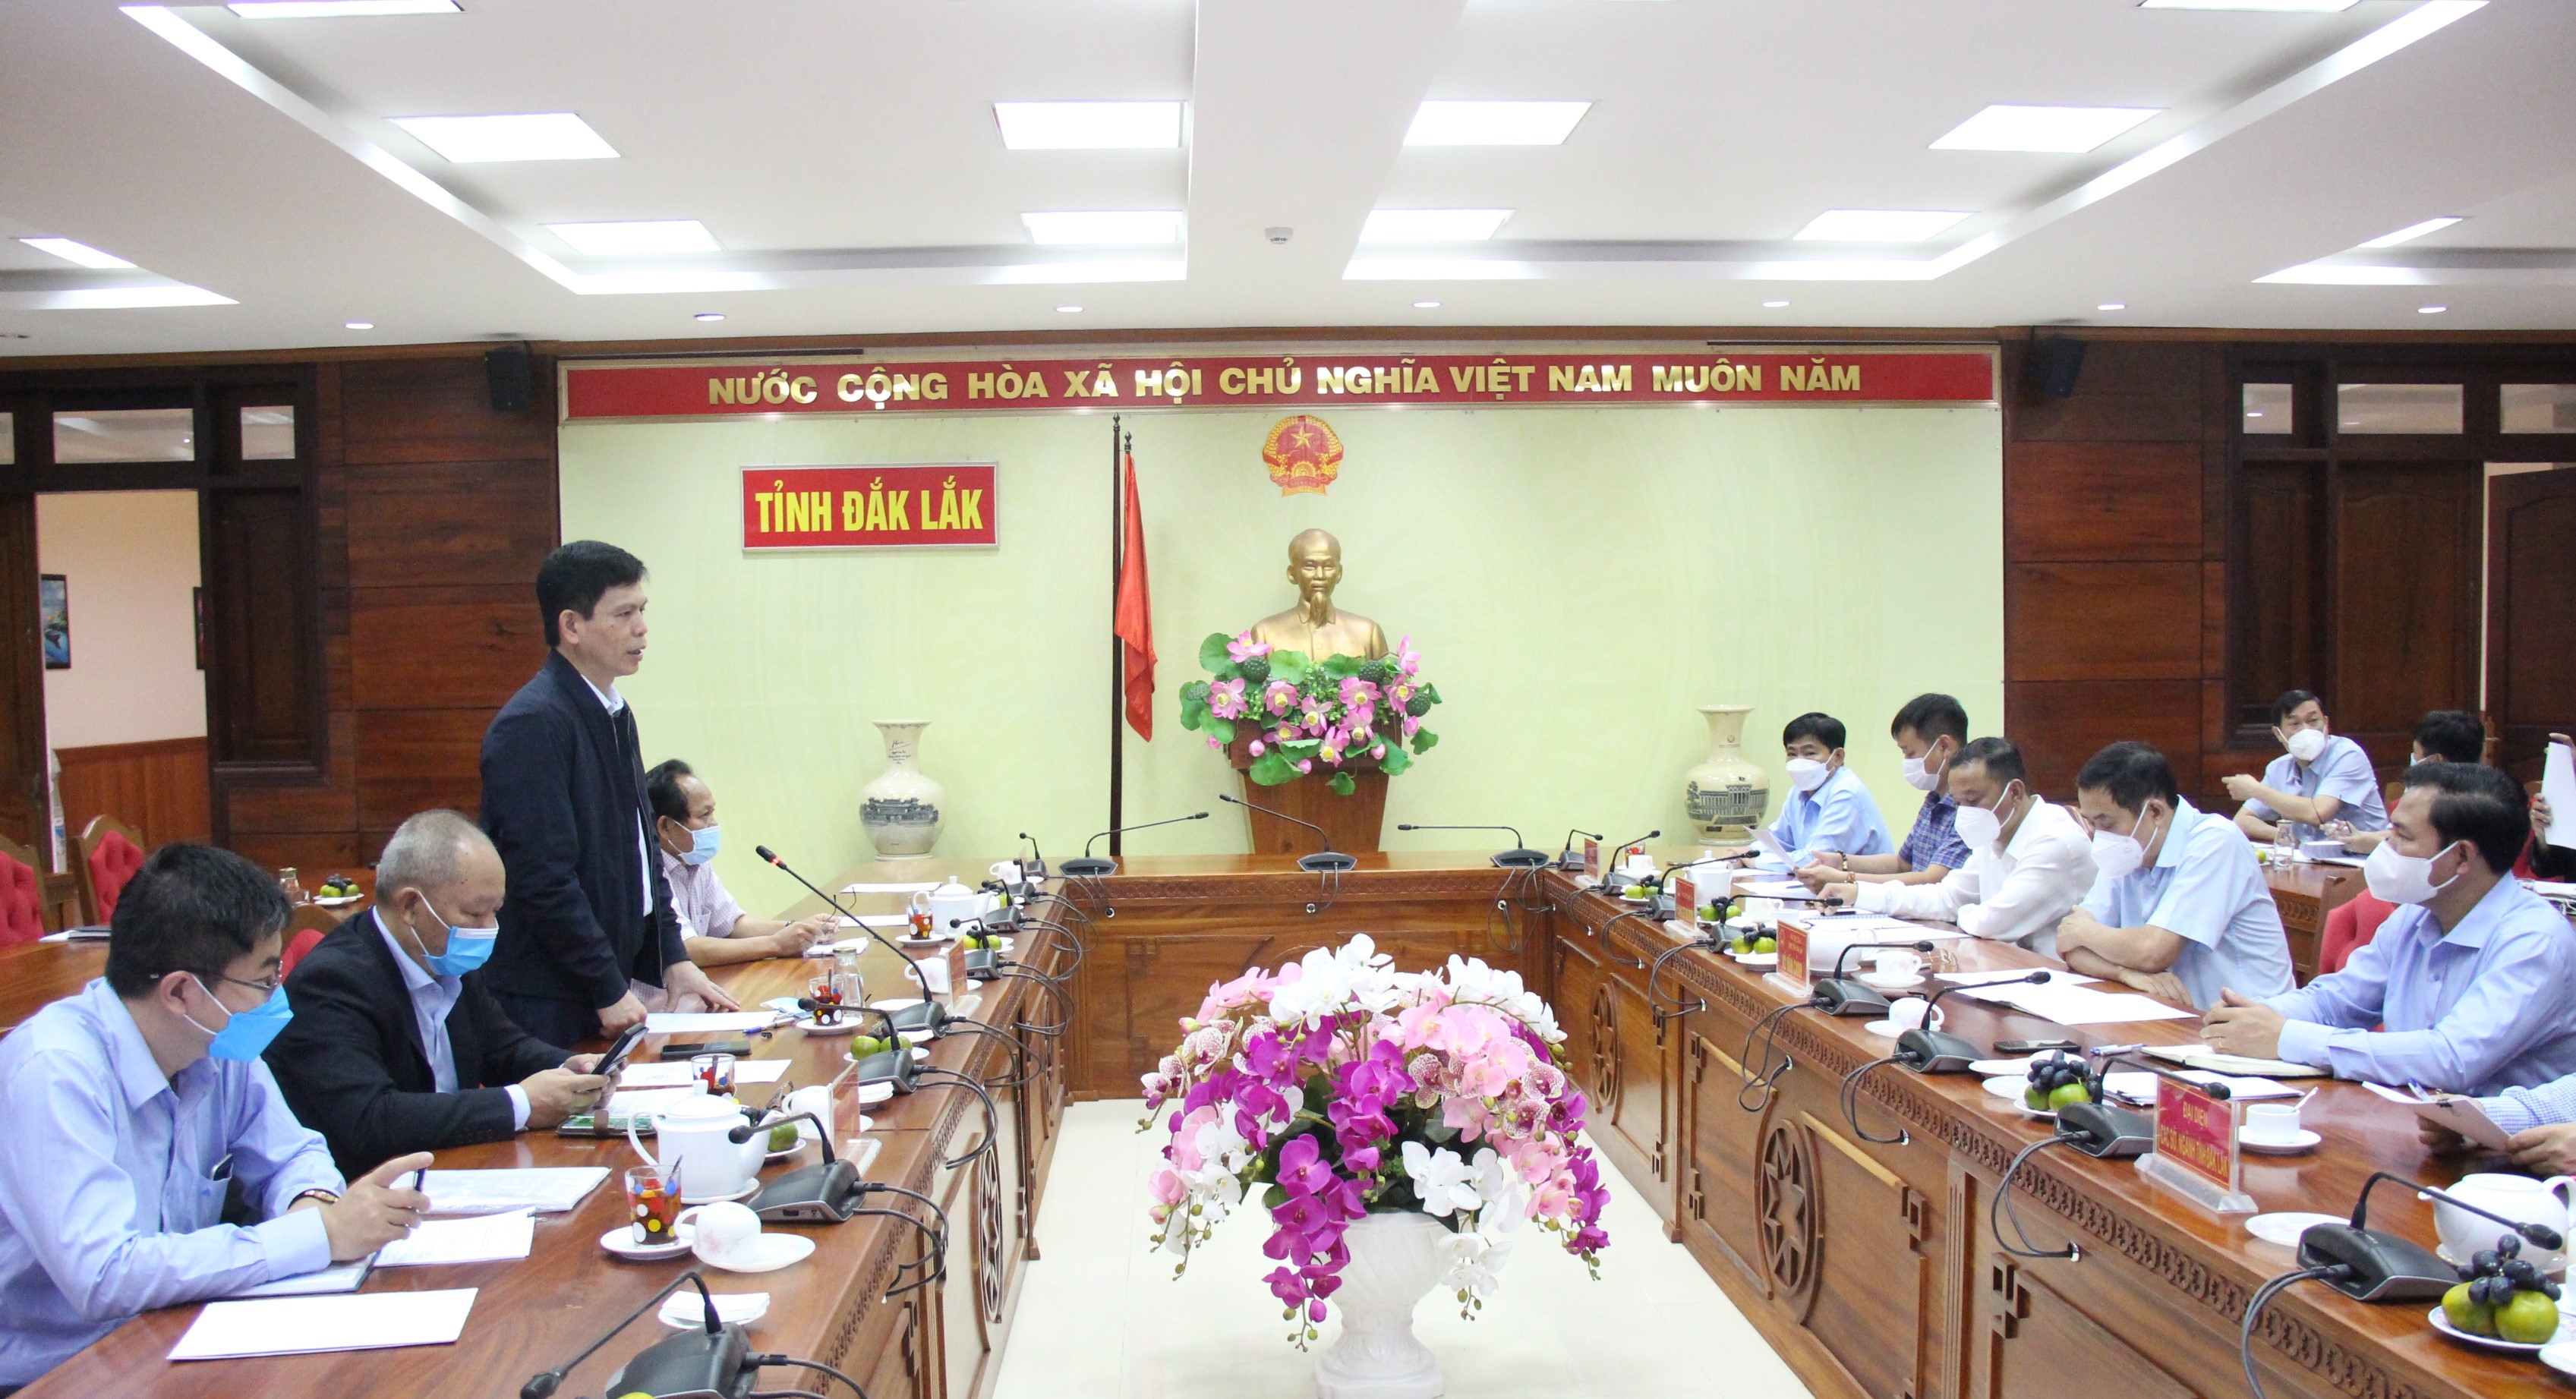 The delegation of the Ministry of Transport meets with the People's Committee of Dak Lak Province